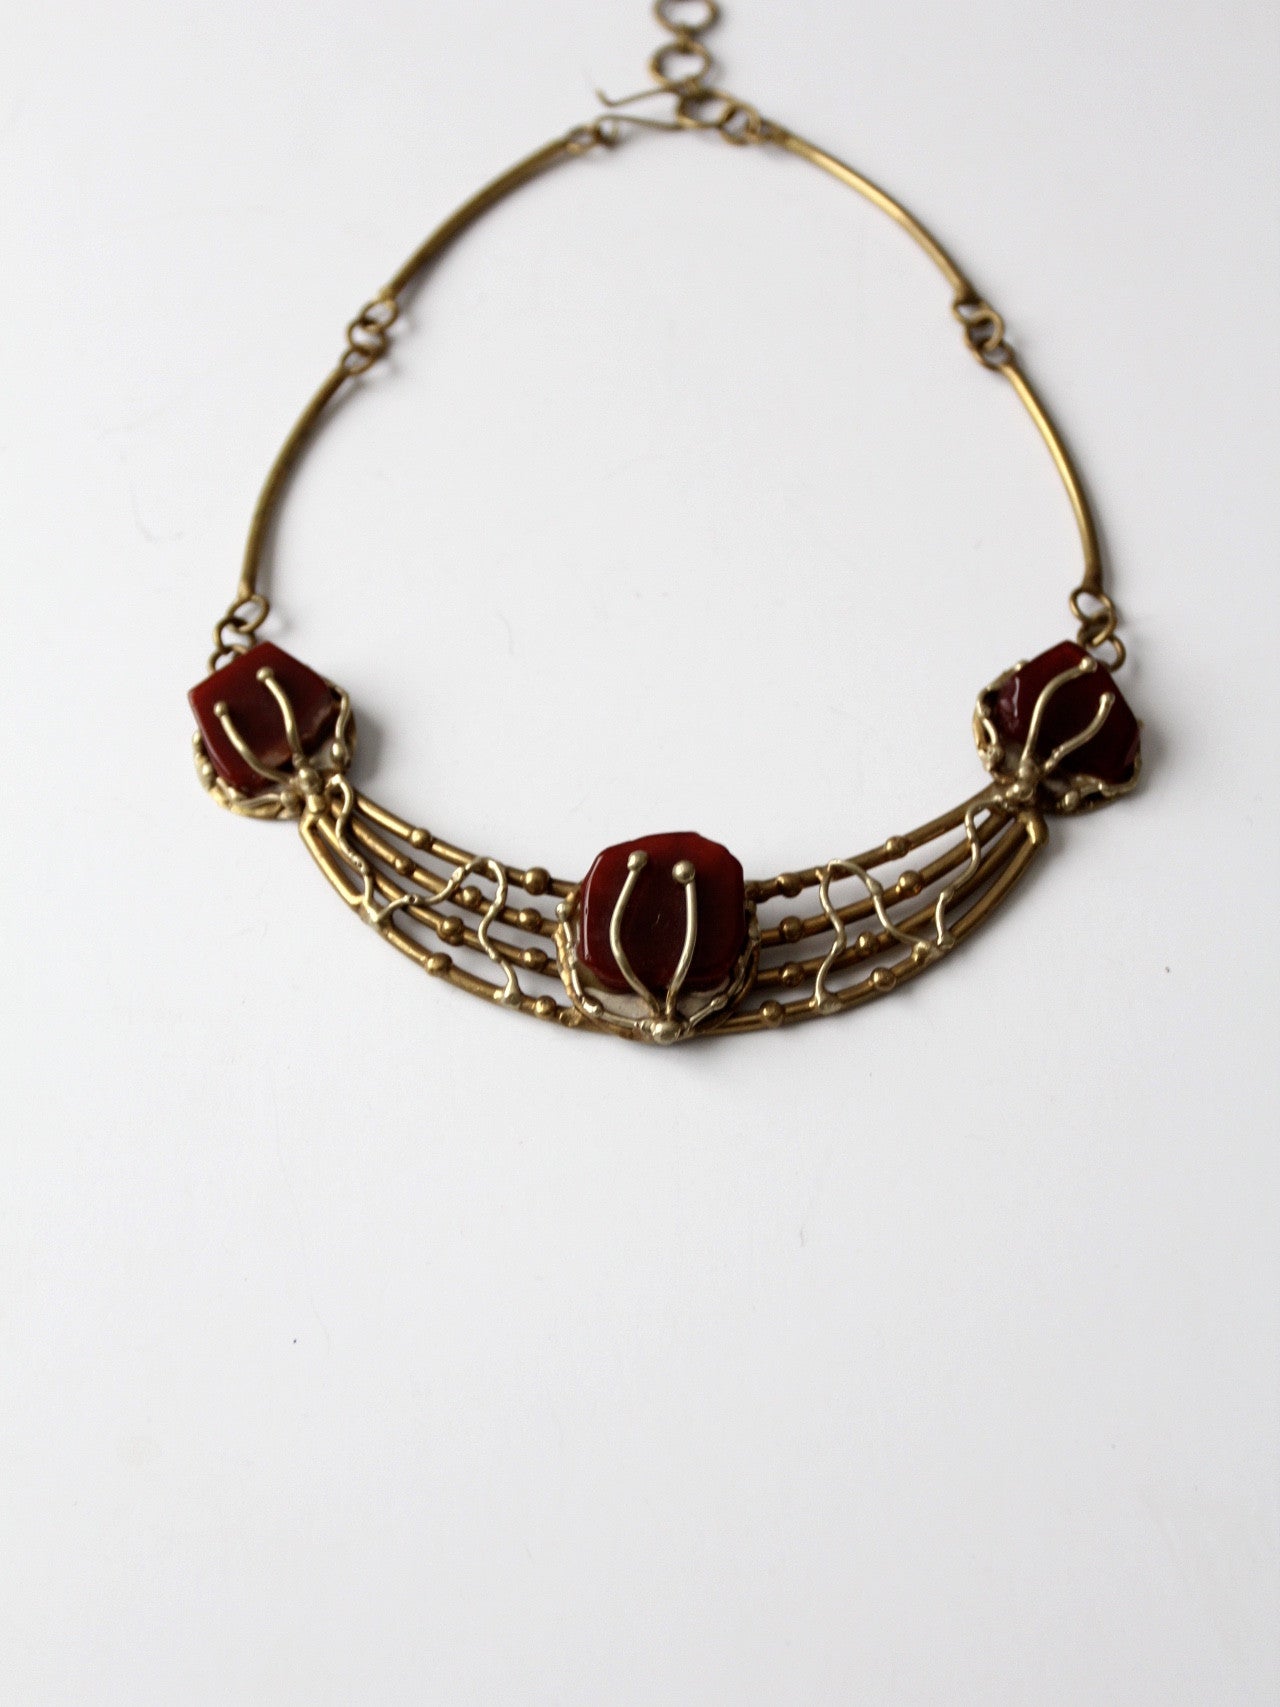 vintage 60s brutalist necklace with stone insets